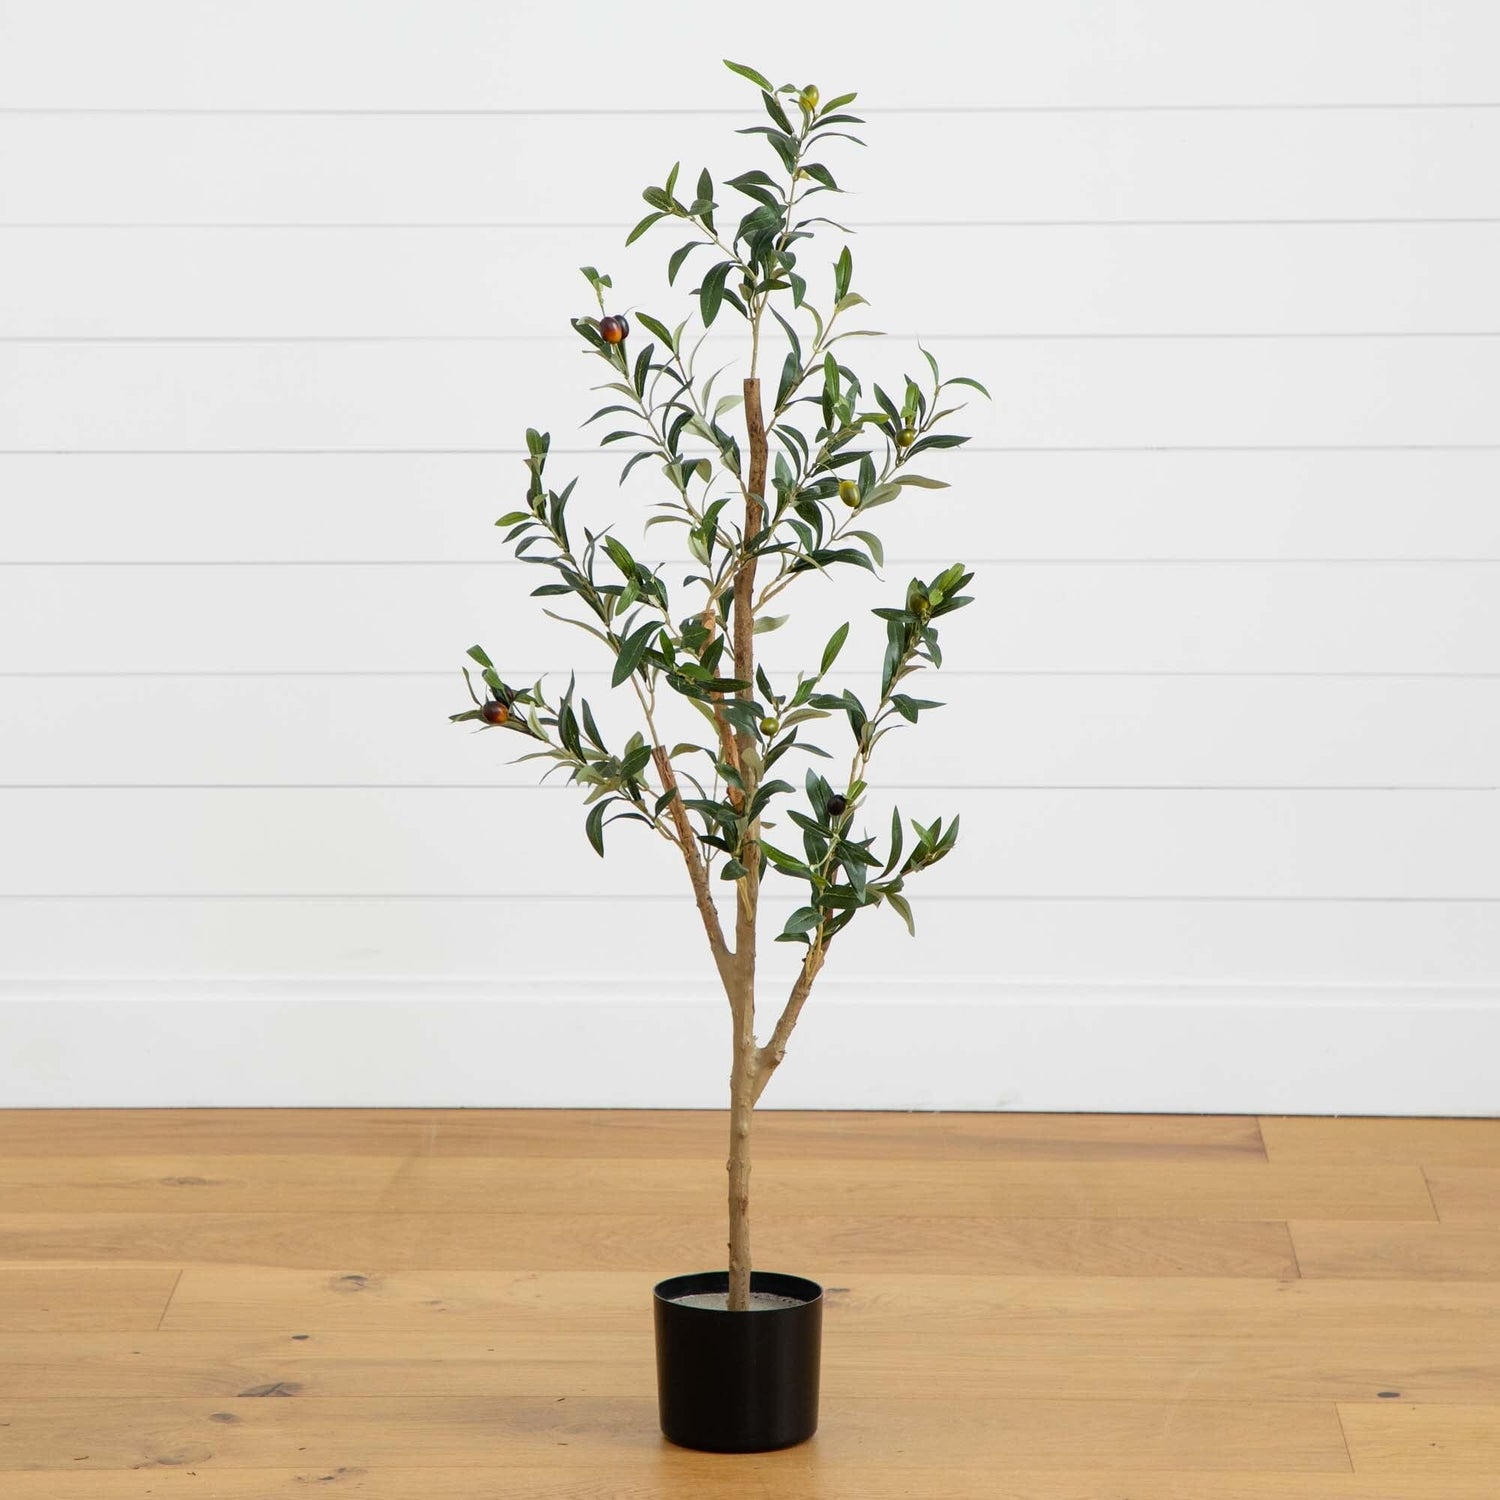 3.5’ Artificial Olive Tree